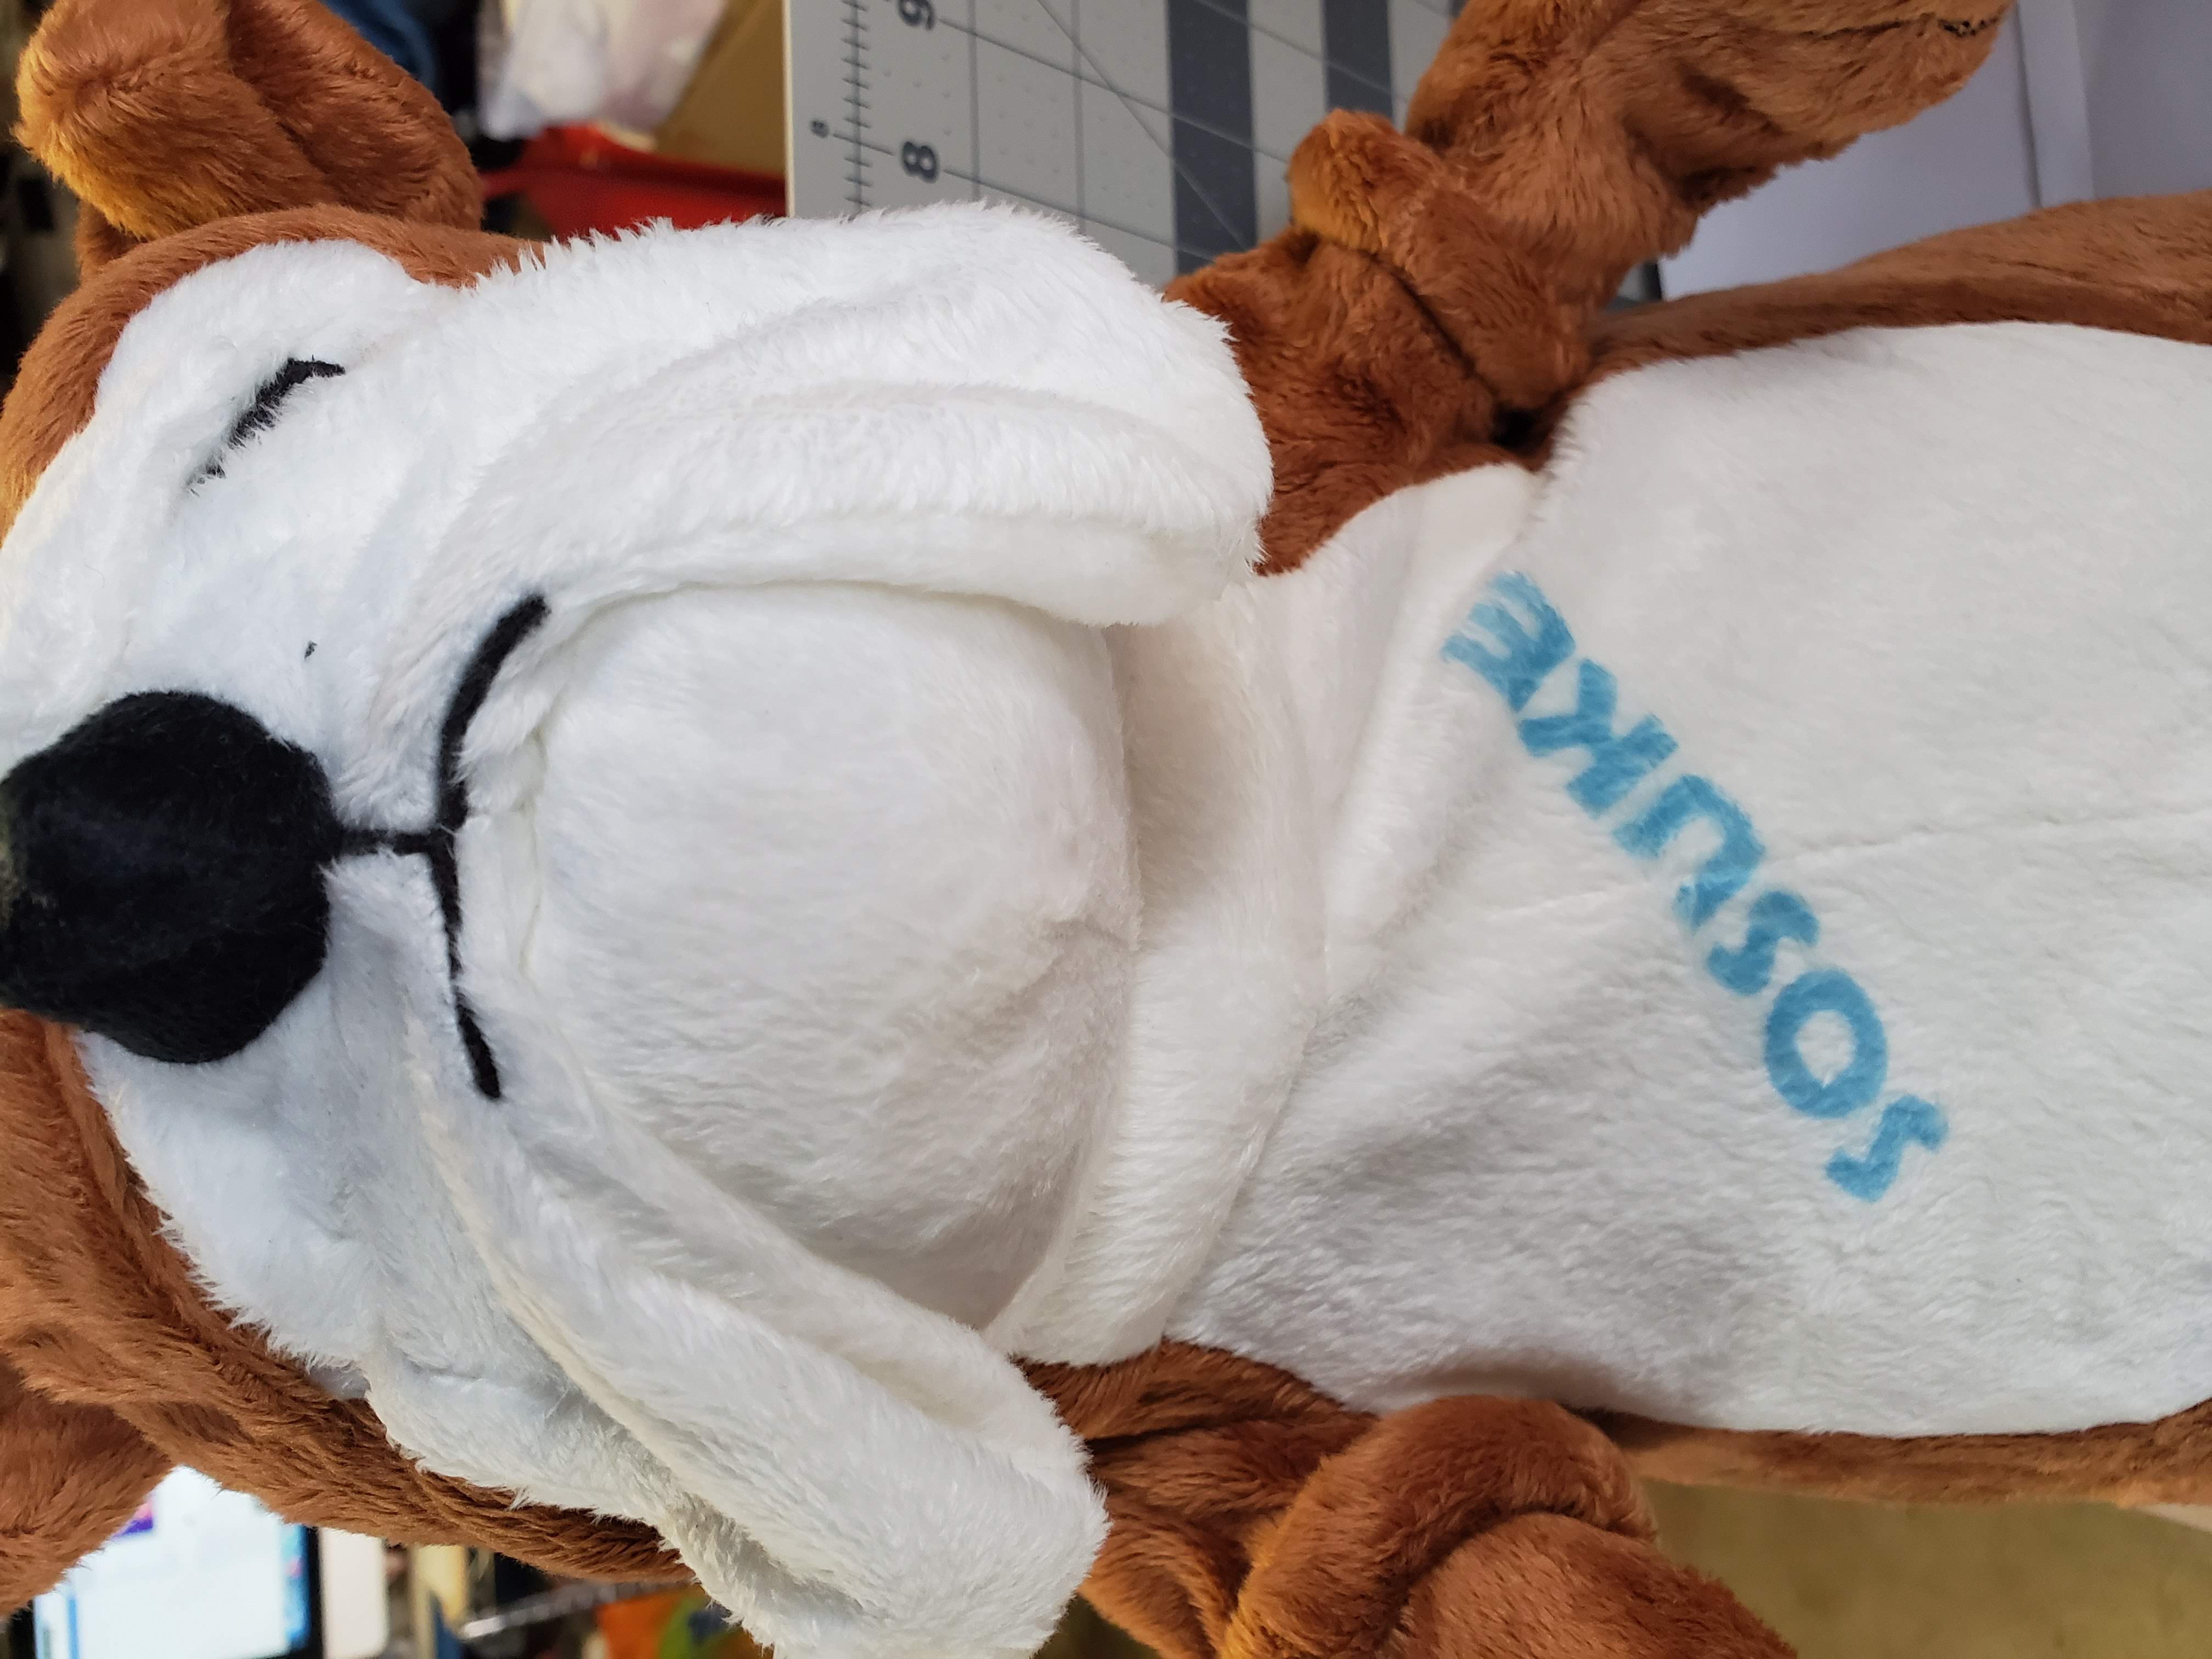 Sublimated name on stuffed animal using TexPrint-R paper and Sawgrass SG800